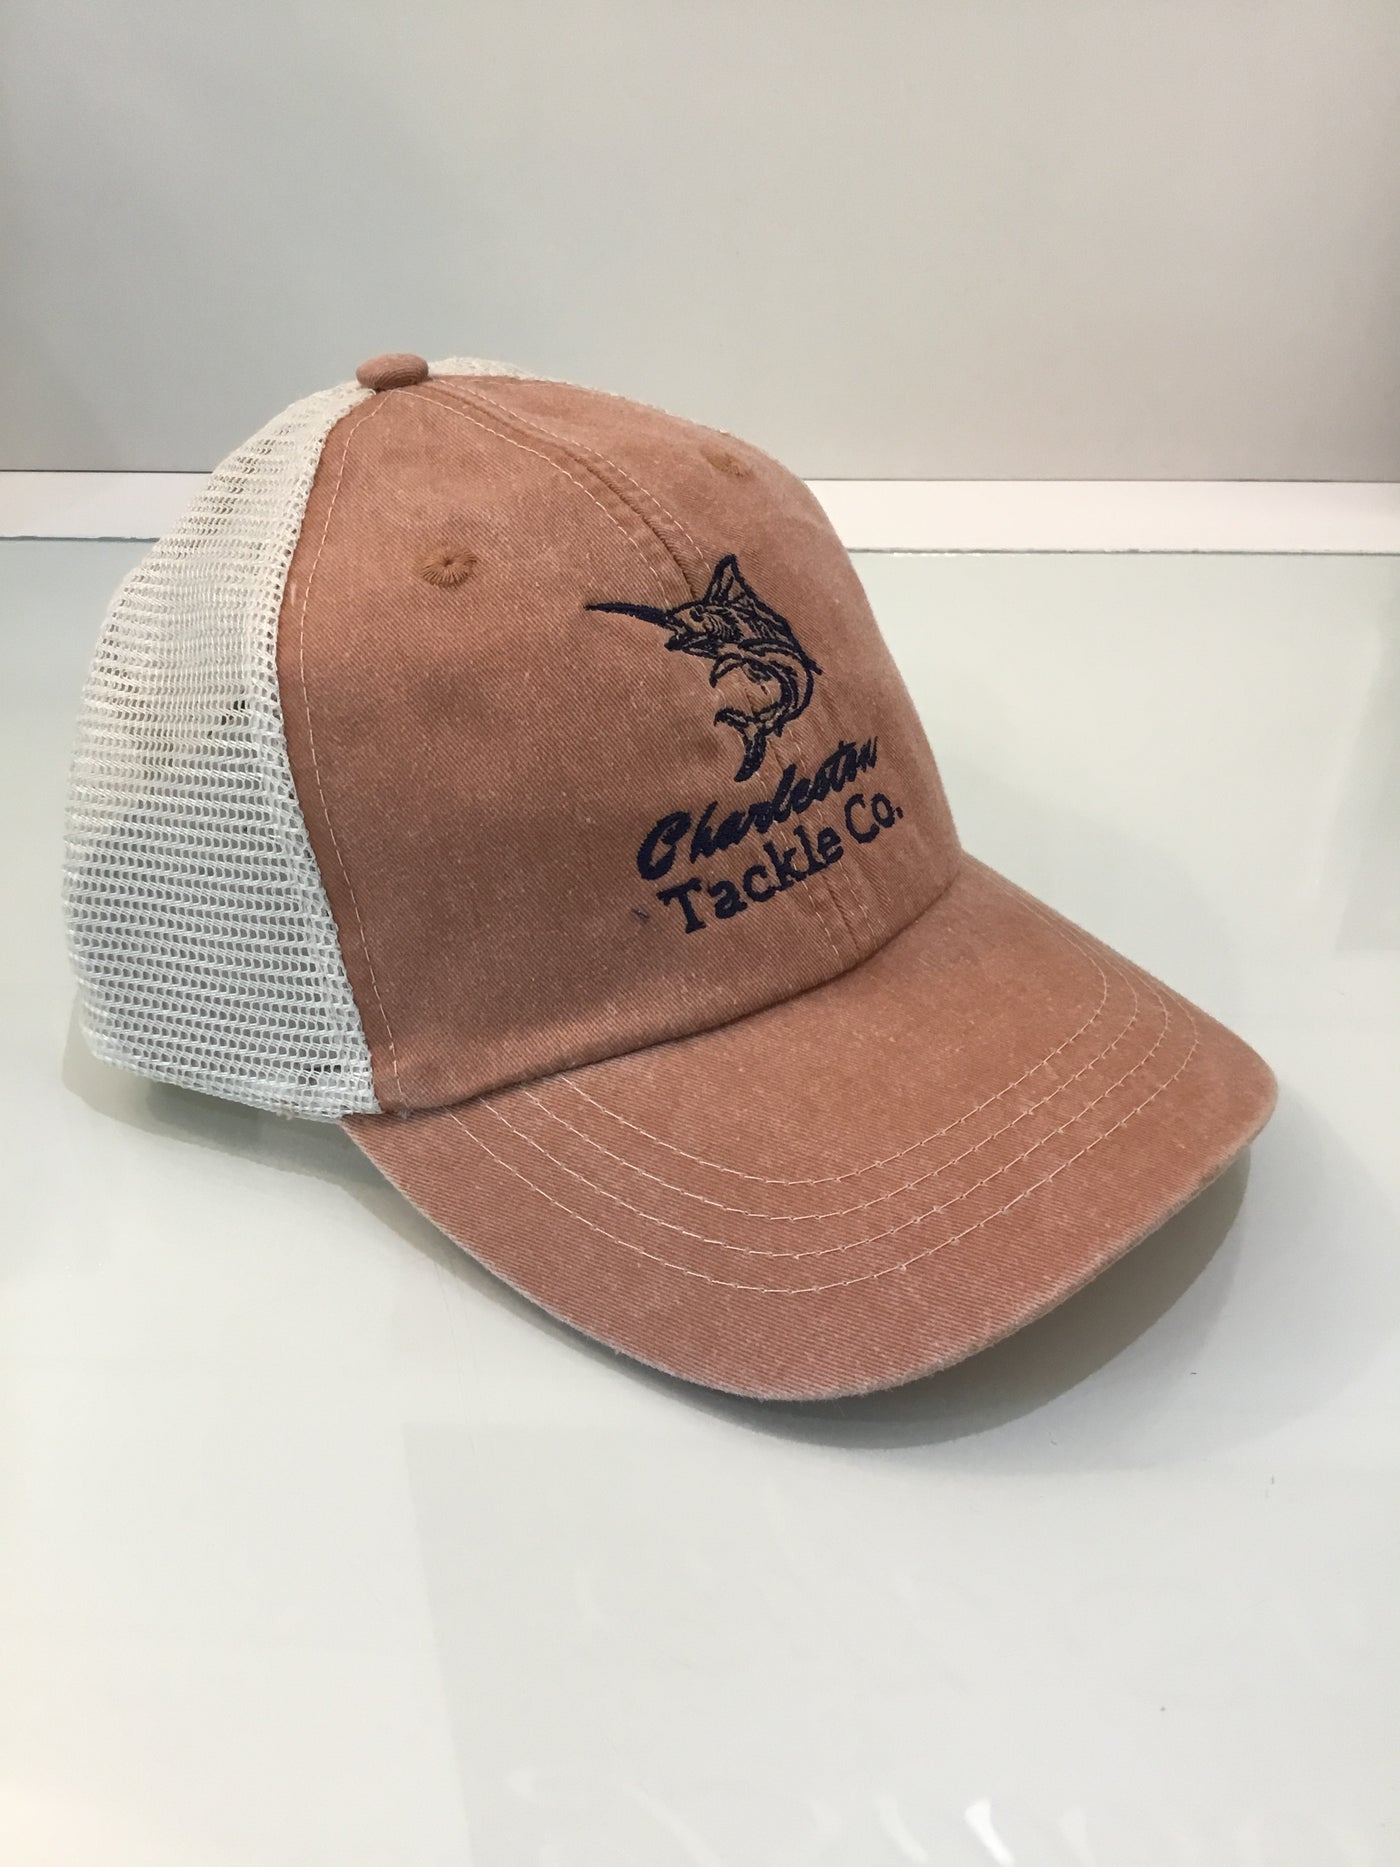 Embroidered Charleston Tackle Co. Trucker Hats